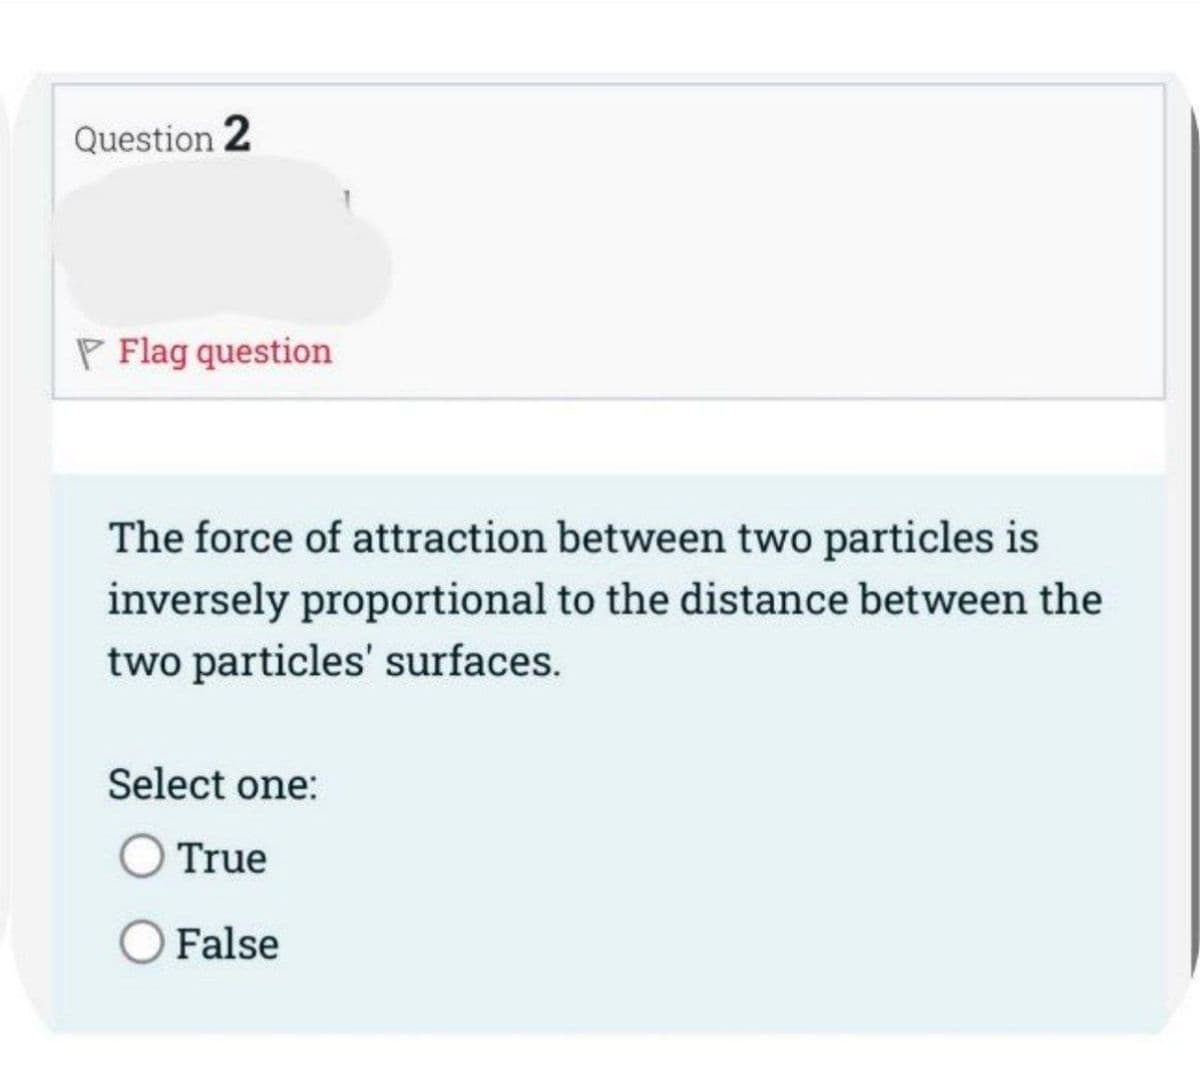 Question 2
P Flag question
The force of attraction between two particles is
inversely proportional to the distance between the
two particles' surfaces.
Select one:
O True
O False